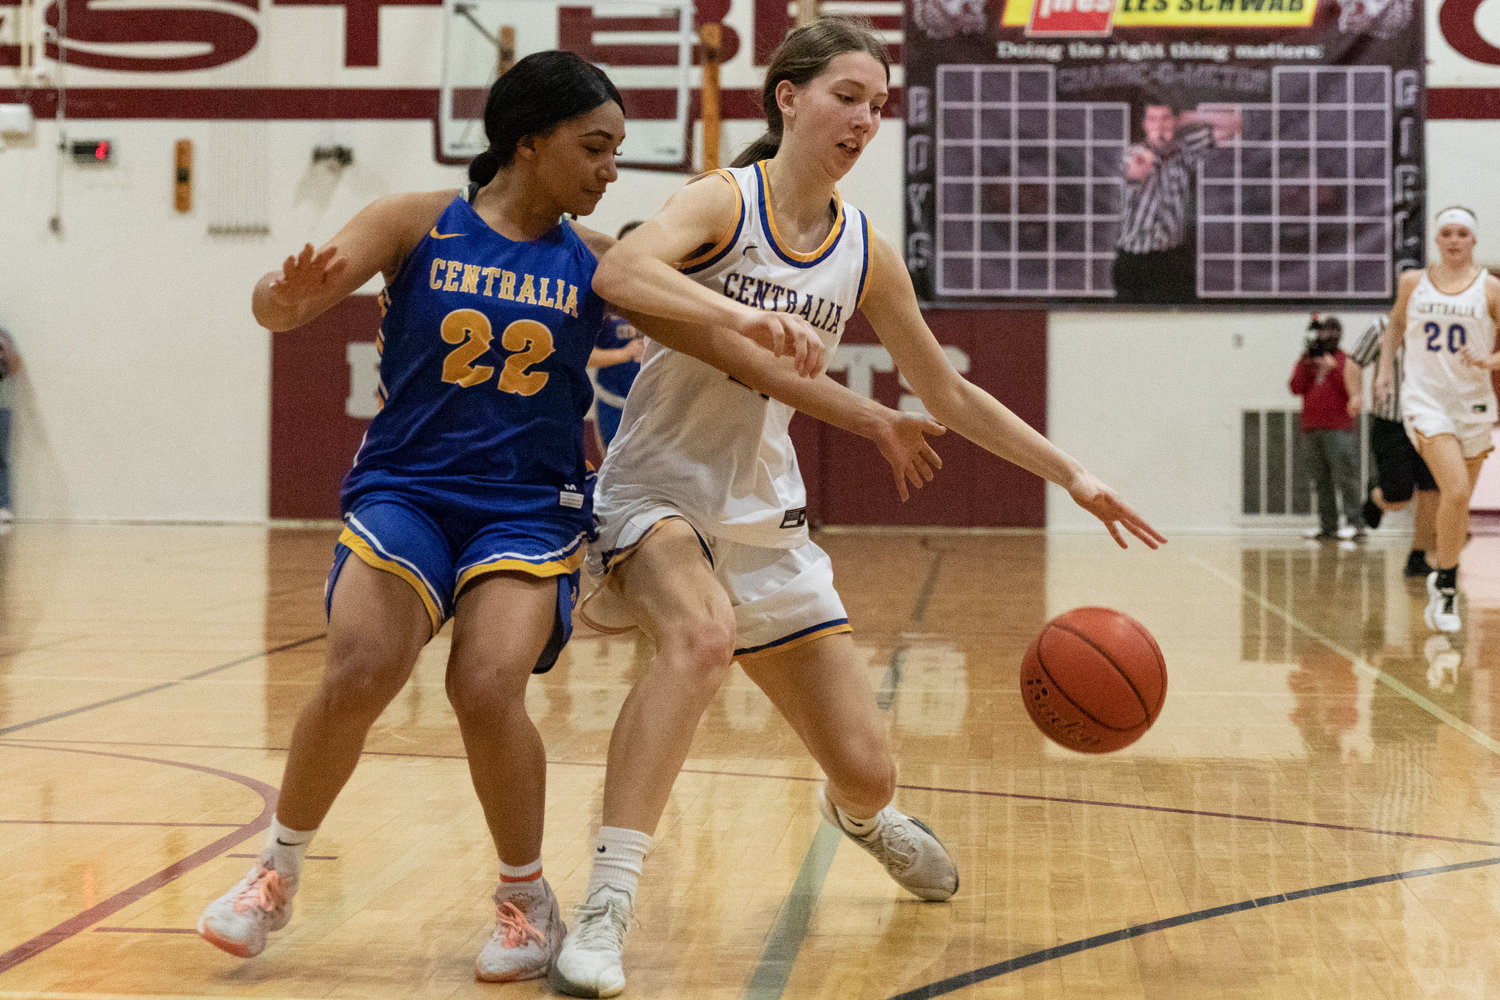 Adna forward Faith Wellander looks to drive past Napavine's Makensee Taliaferro at the SWW Senior All-Star Game March 26 at W.F. West.